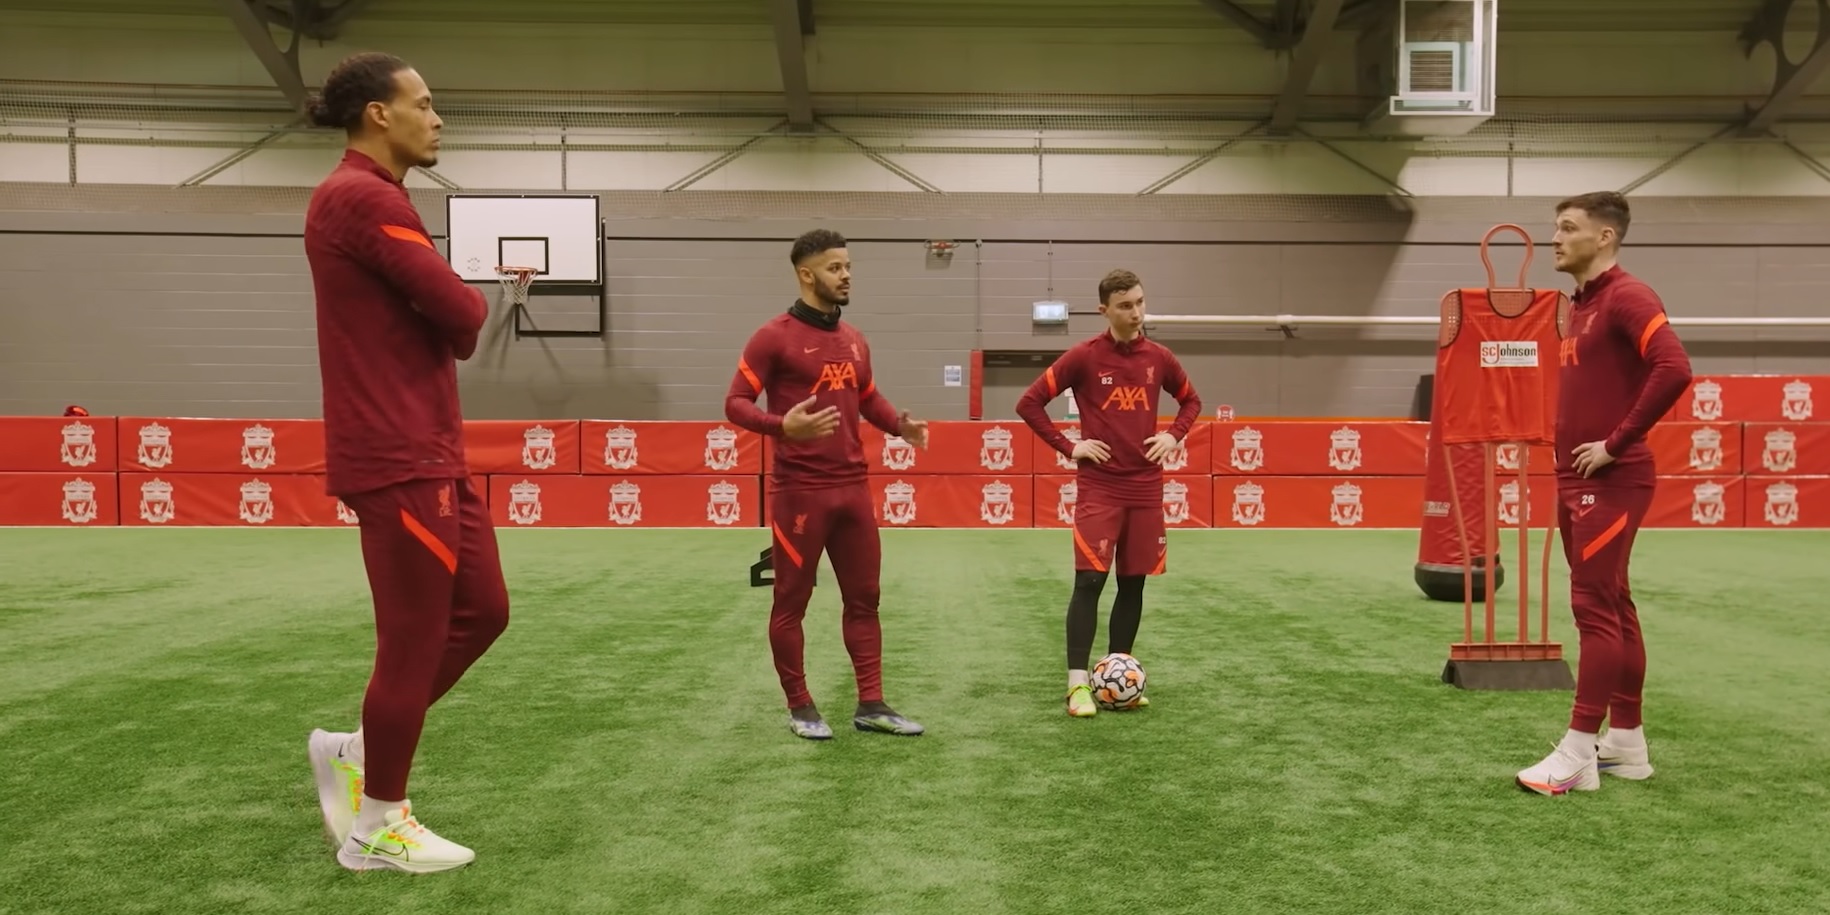 (Video) ‘His crossing is magnificent’ – Van Dijk wowed by Liverpool’s Polish Messi during training drill